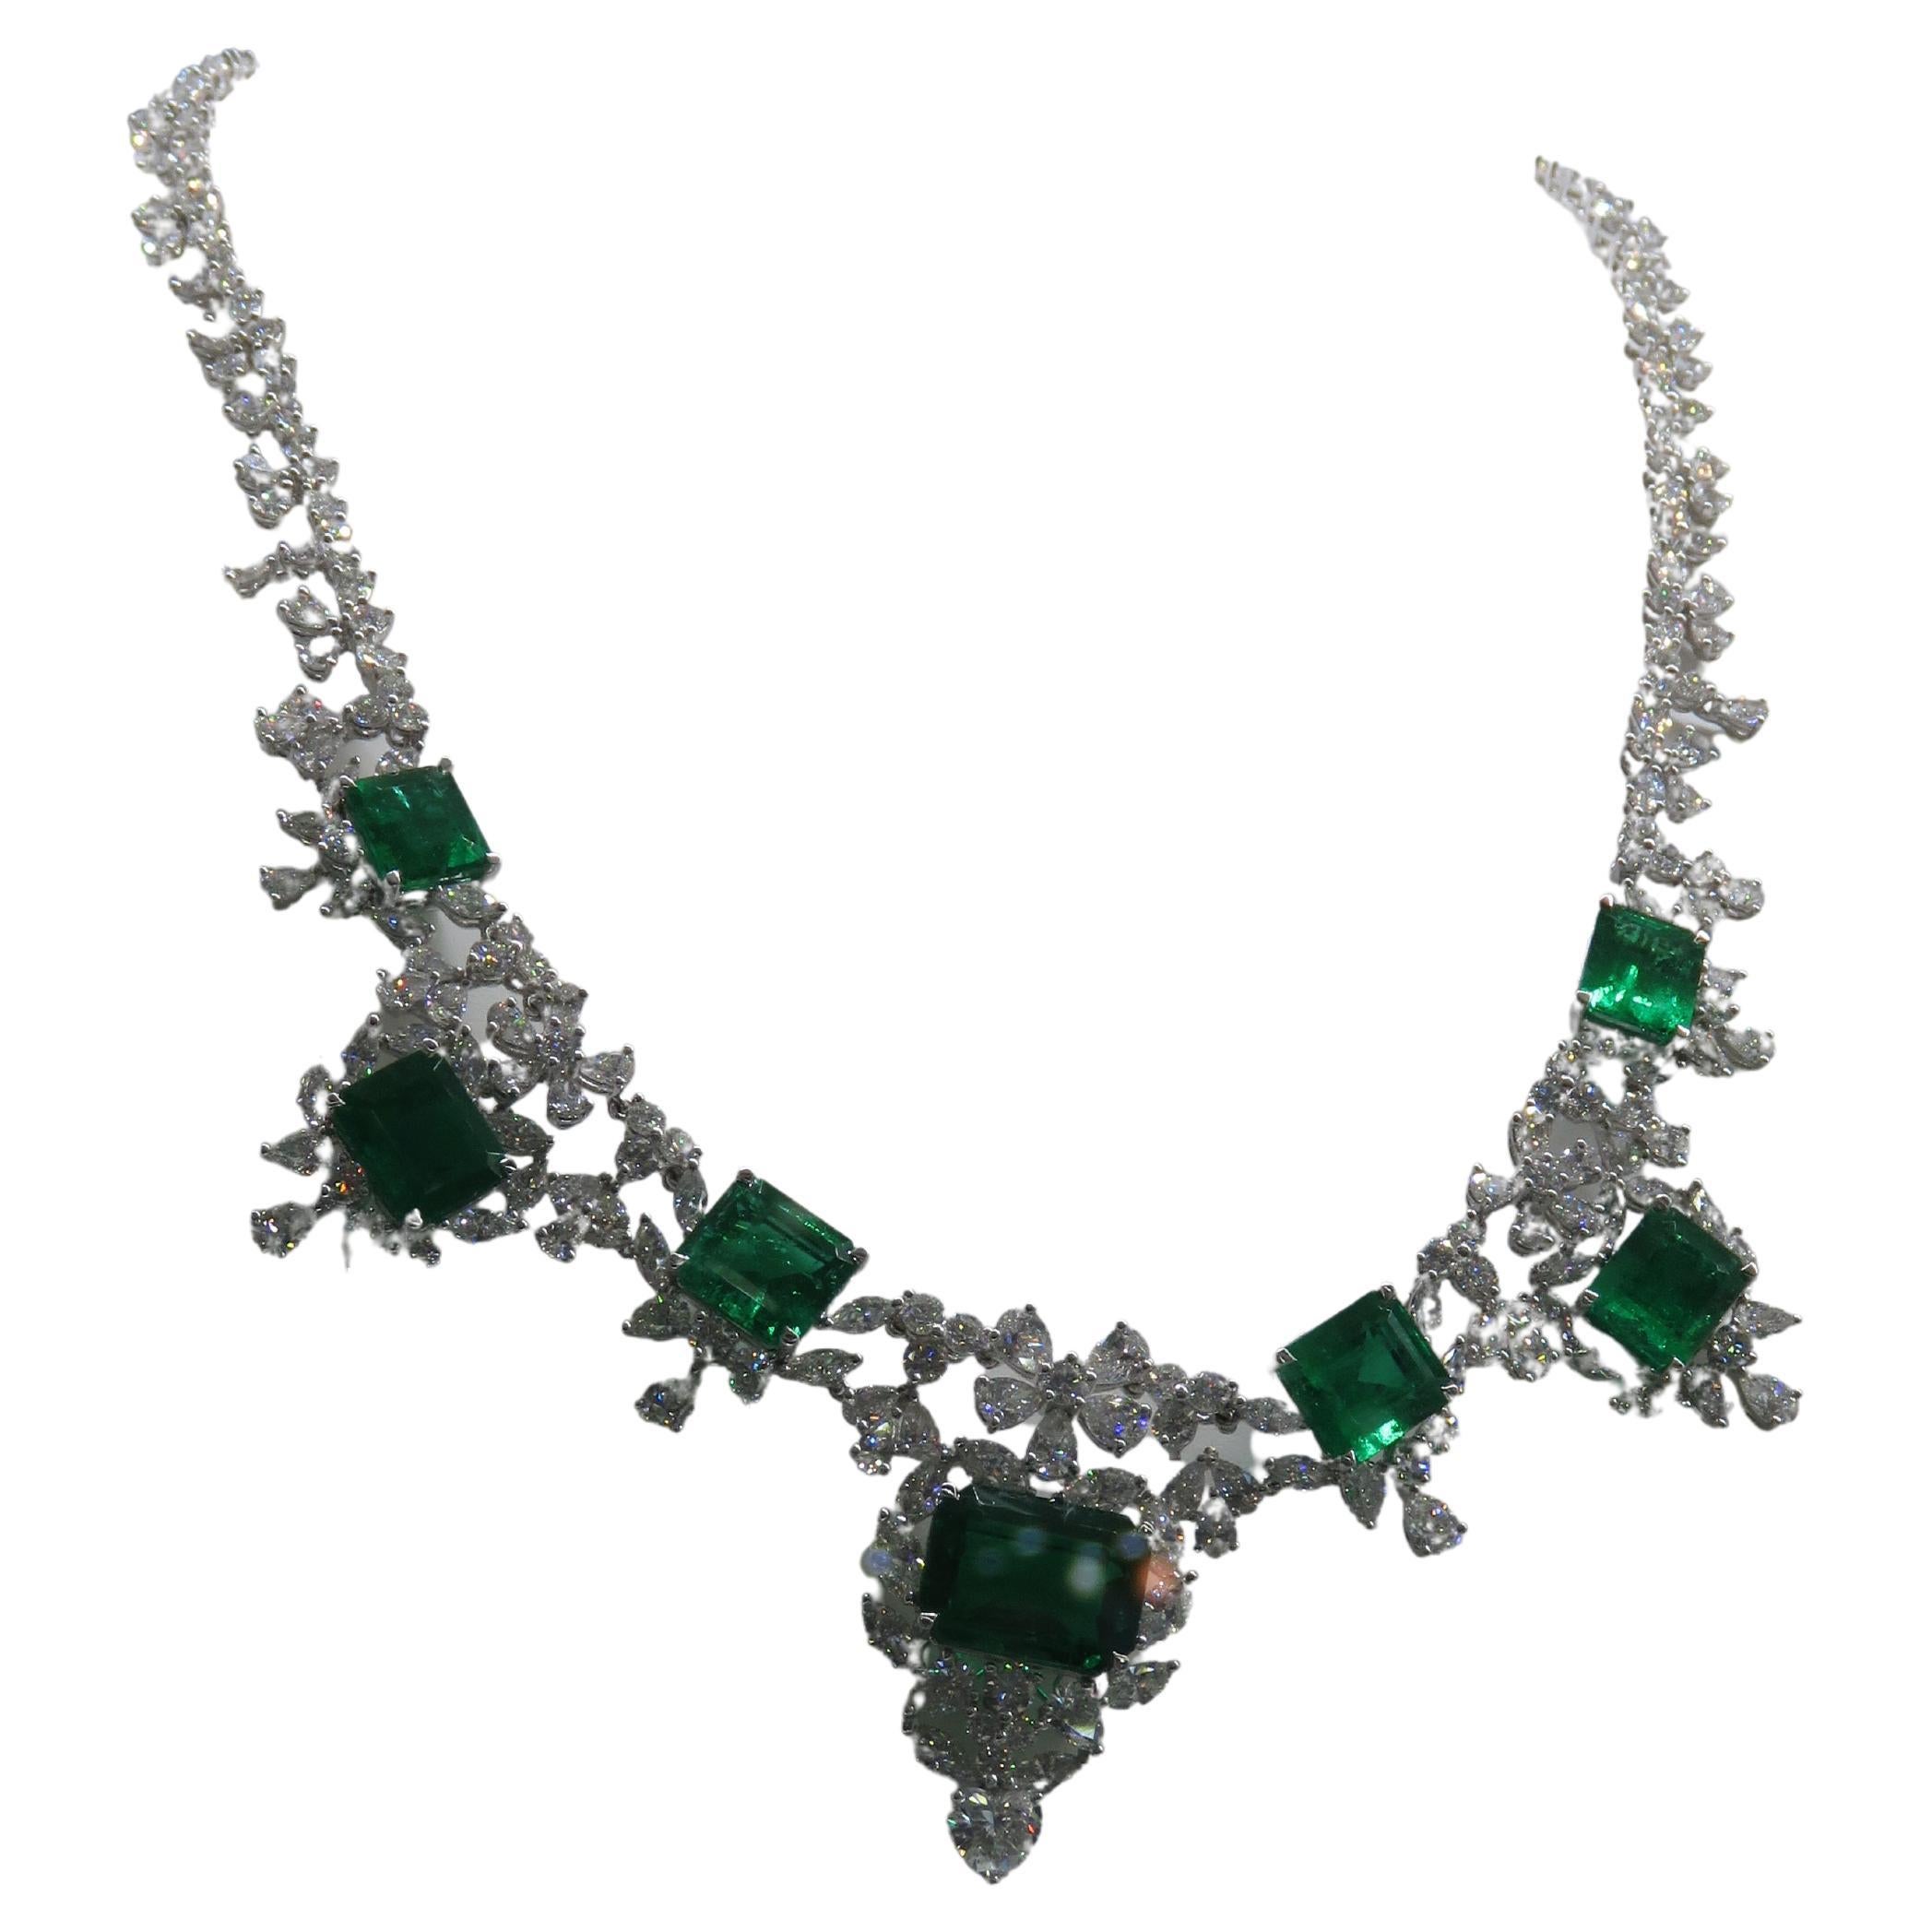 NWT $900, 000 18KT Large Glittering Fancy 45CT Colombian Emerald Diamond Necklace For Sale